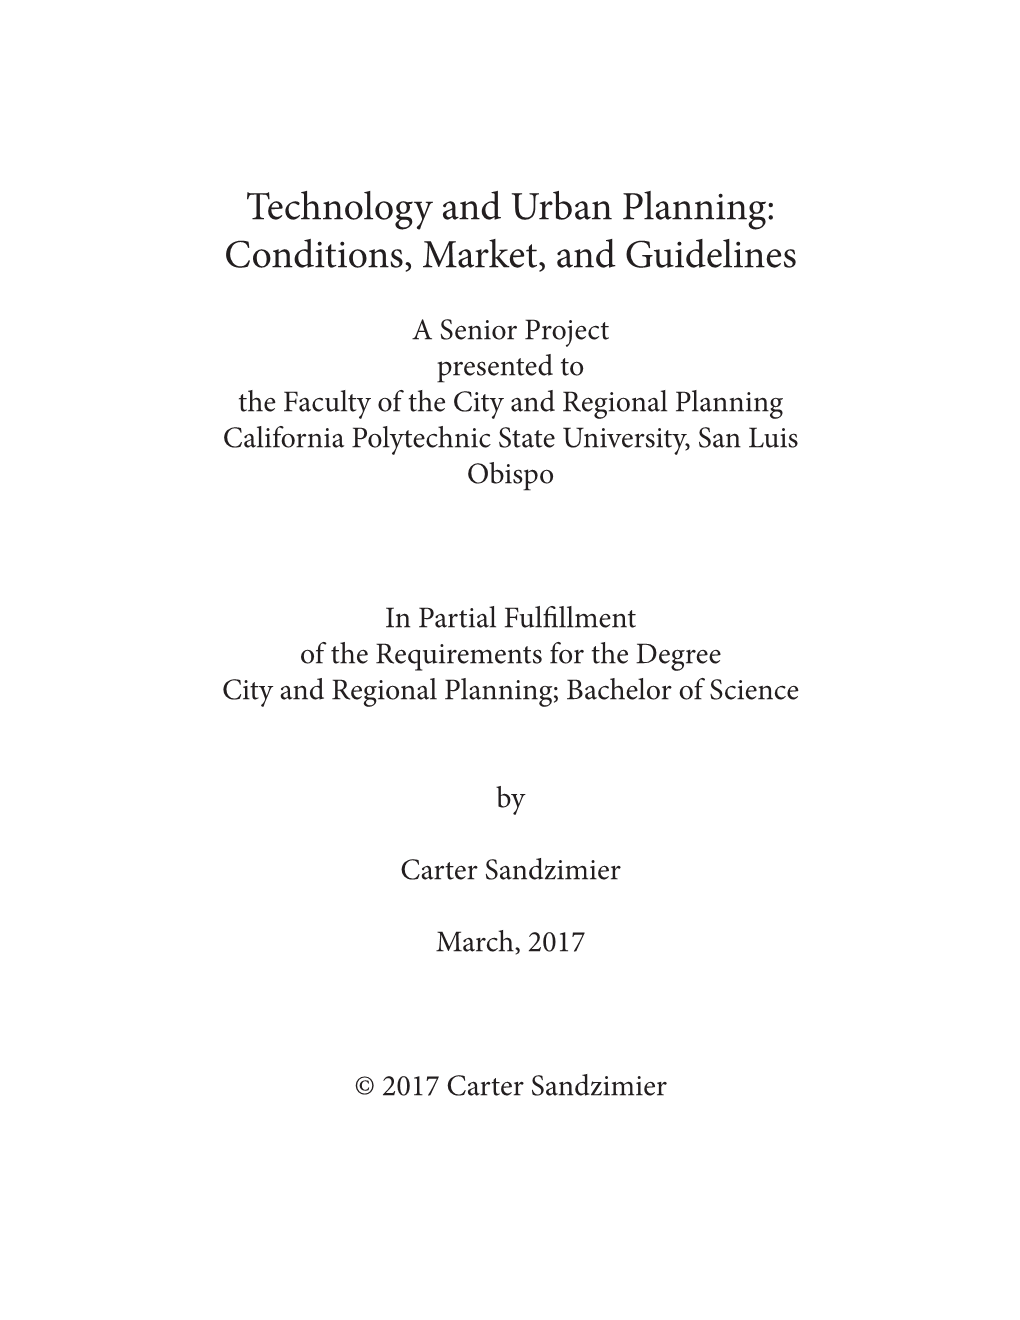 Technology and Urban Planning: Conditions, Market, and Guidelines